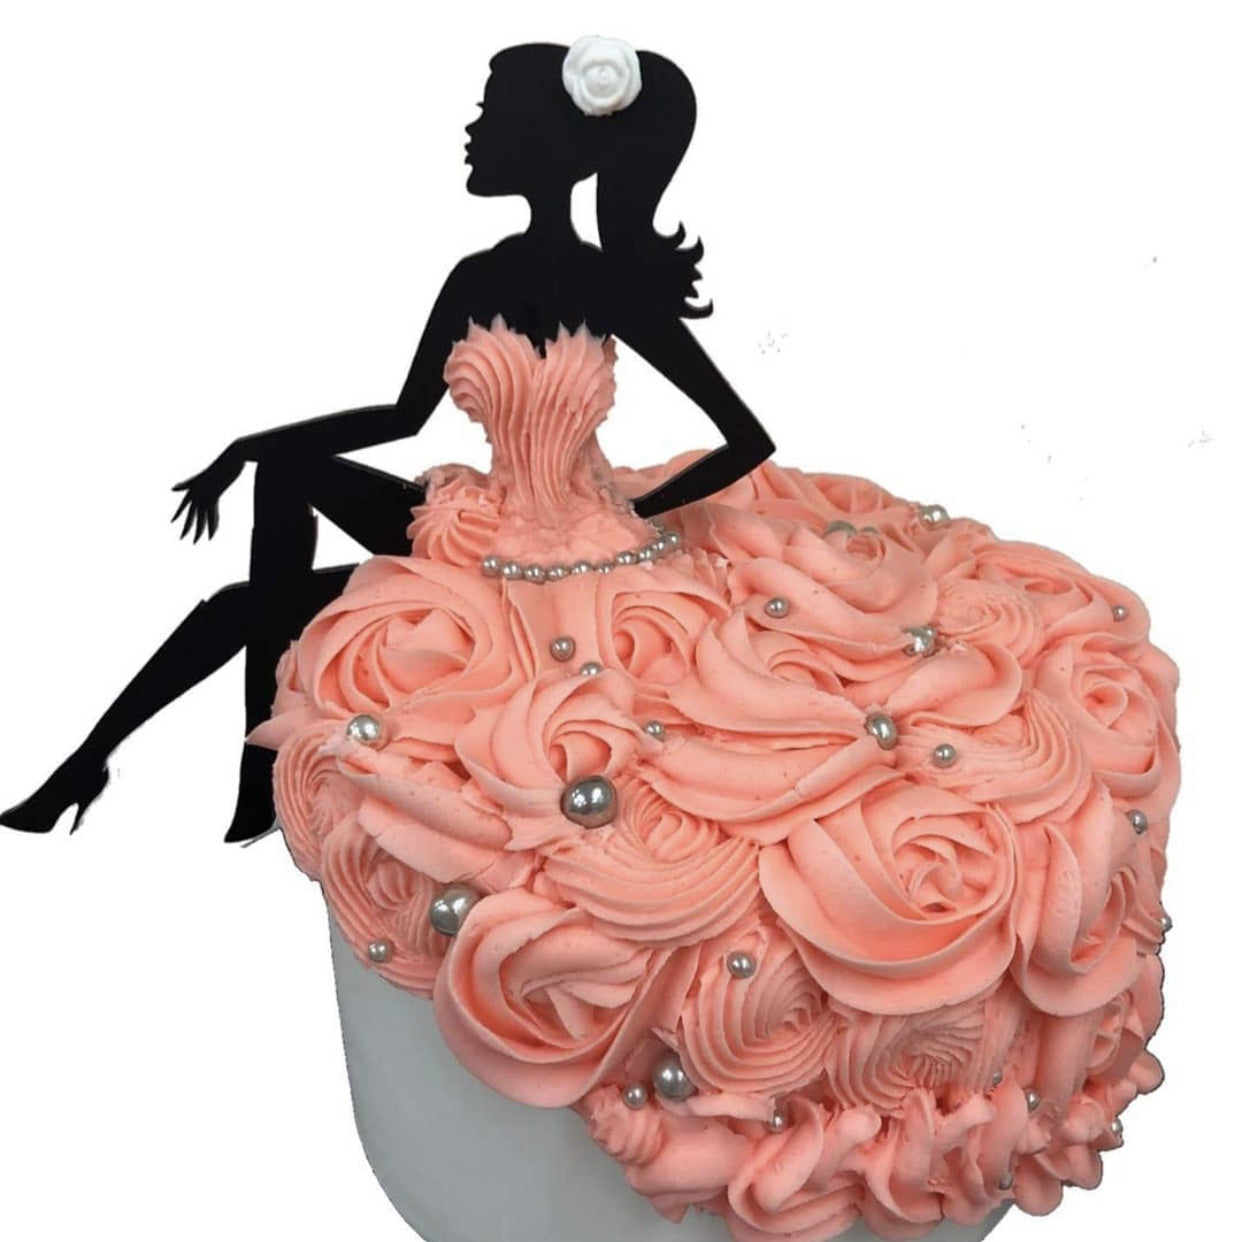 Etched Cake Topper - Lady Sitting Silhouette Black